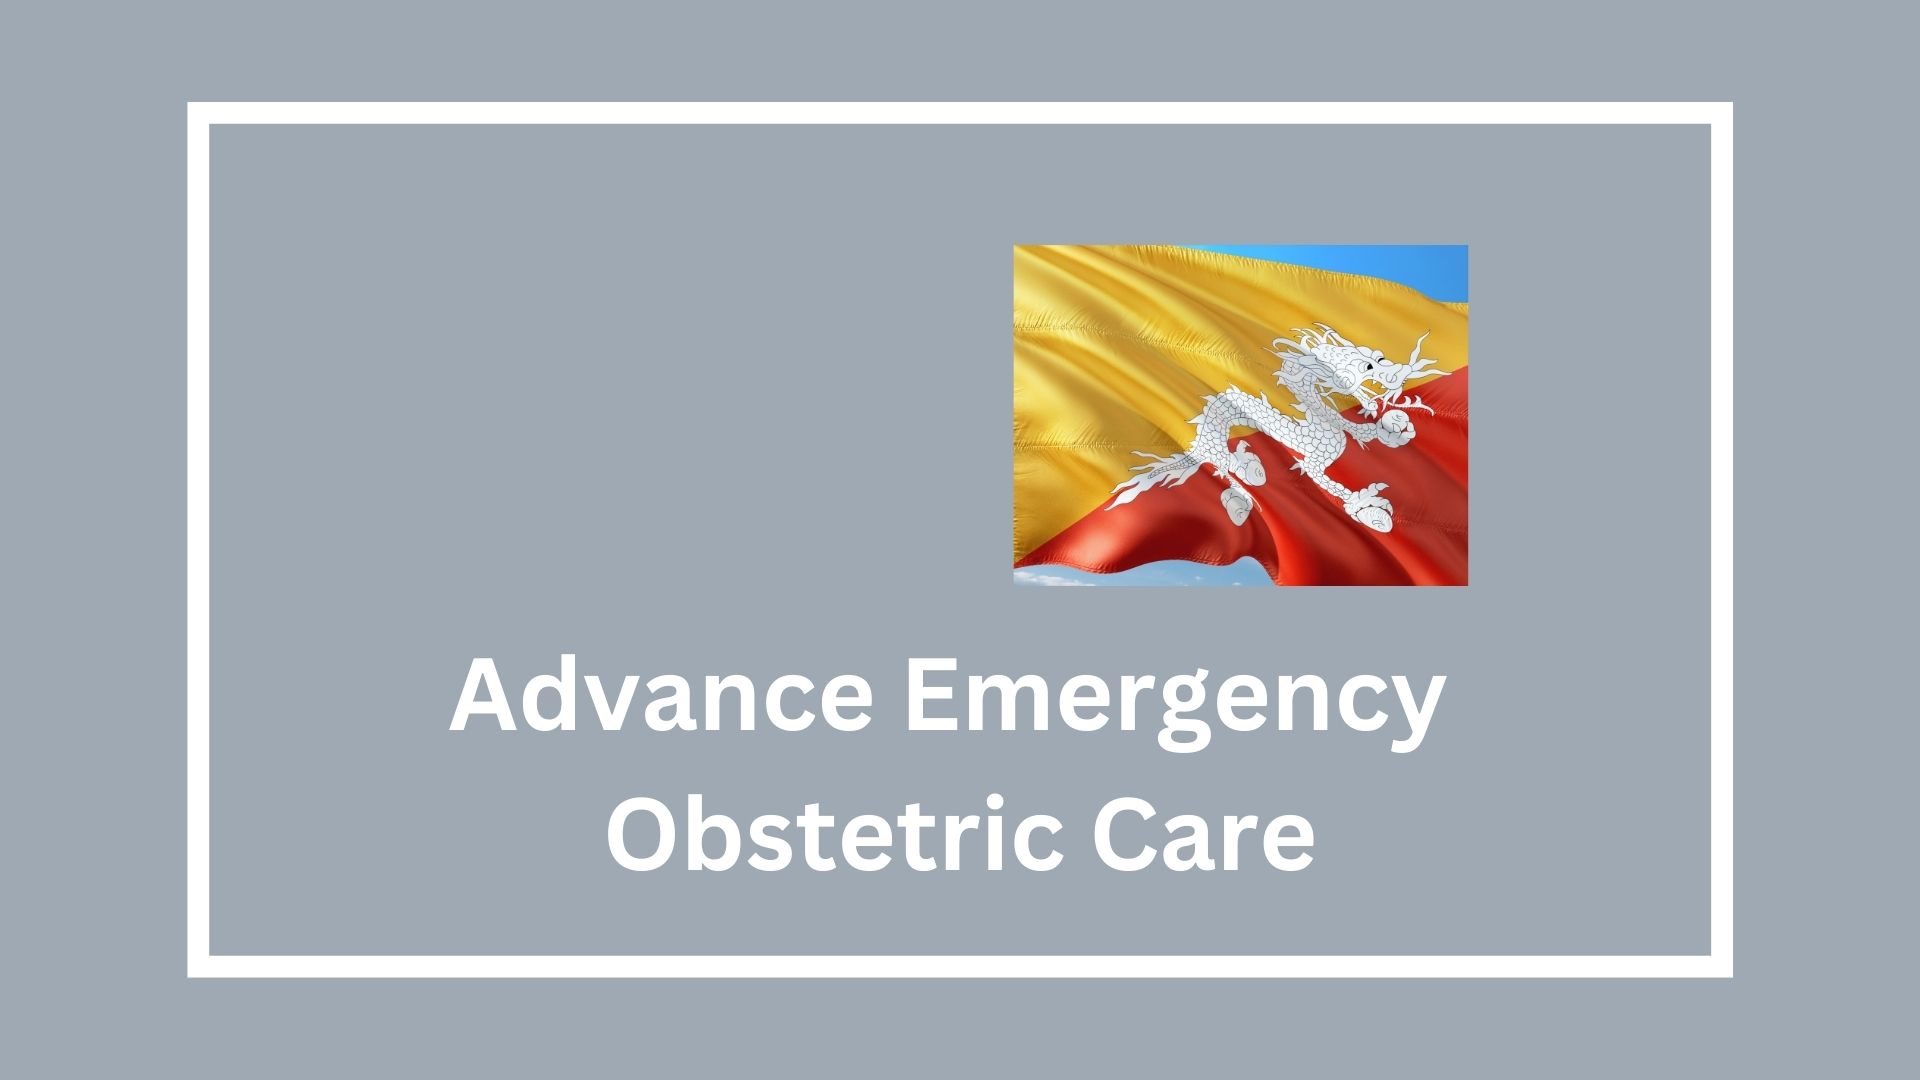 Advanced Emergency Obstetric Care